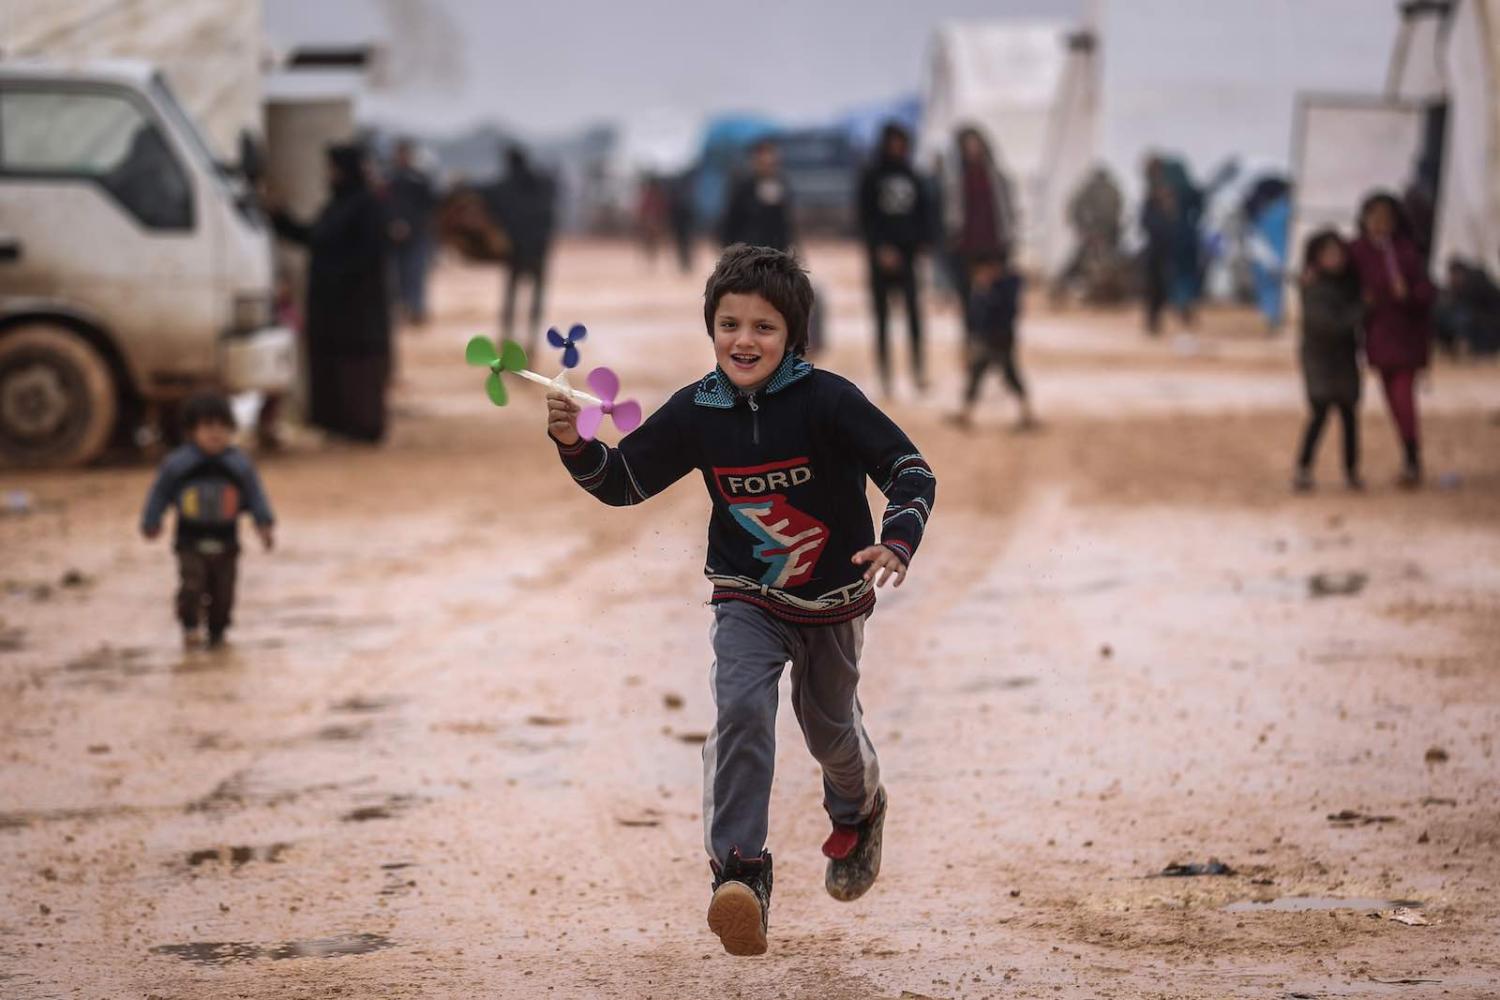 A boy plays at a makeshift camp for people displaced by conflict, Idlib, Syria, 6 February (Photo: Anas Alkharboutli/picture alliance via Getty Images)